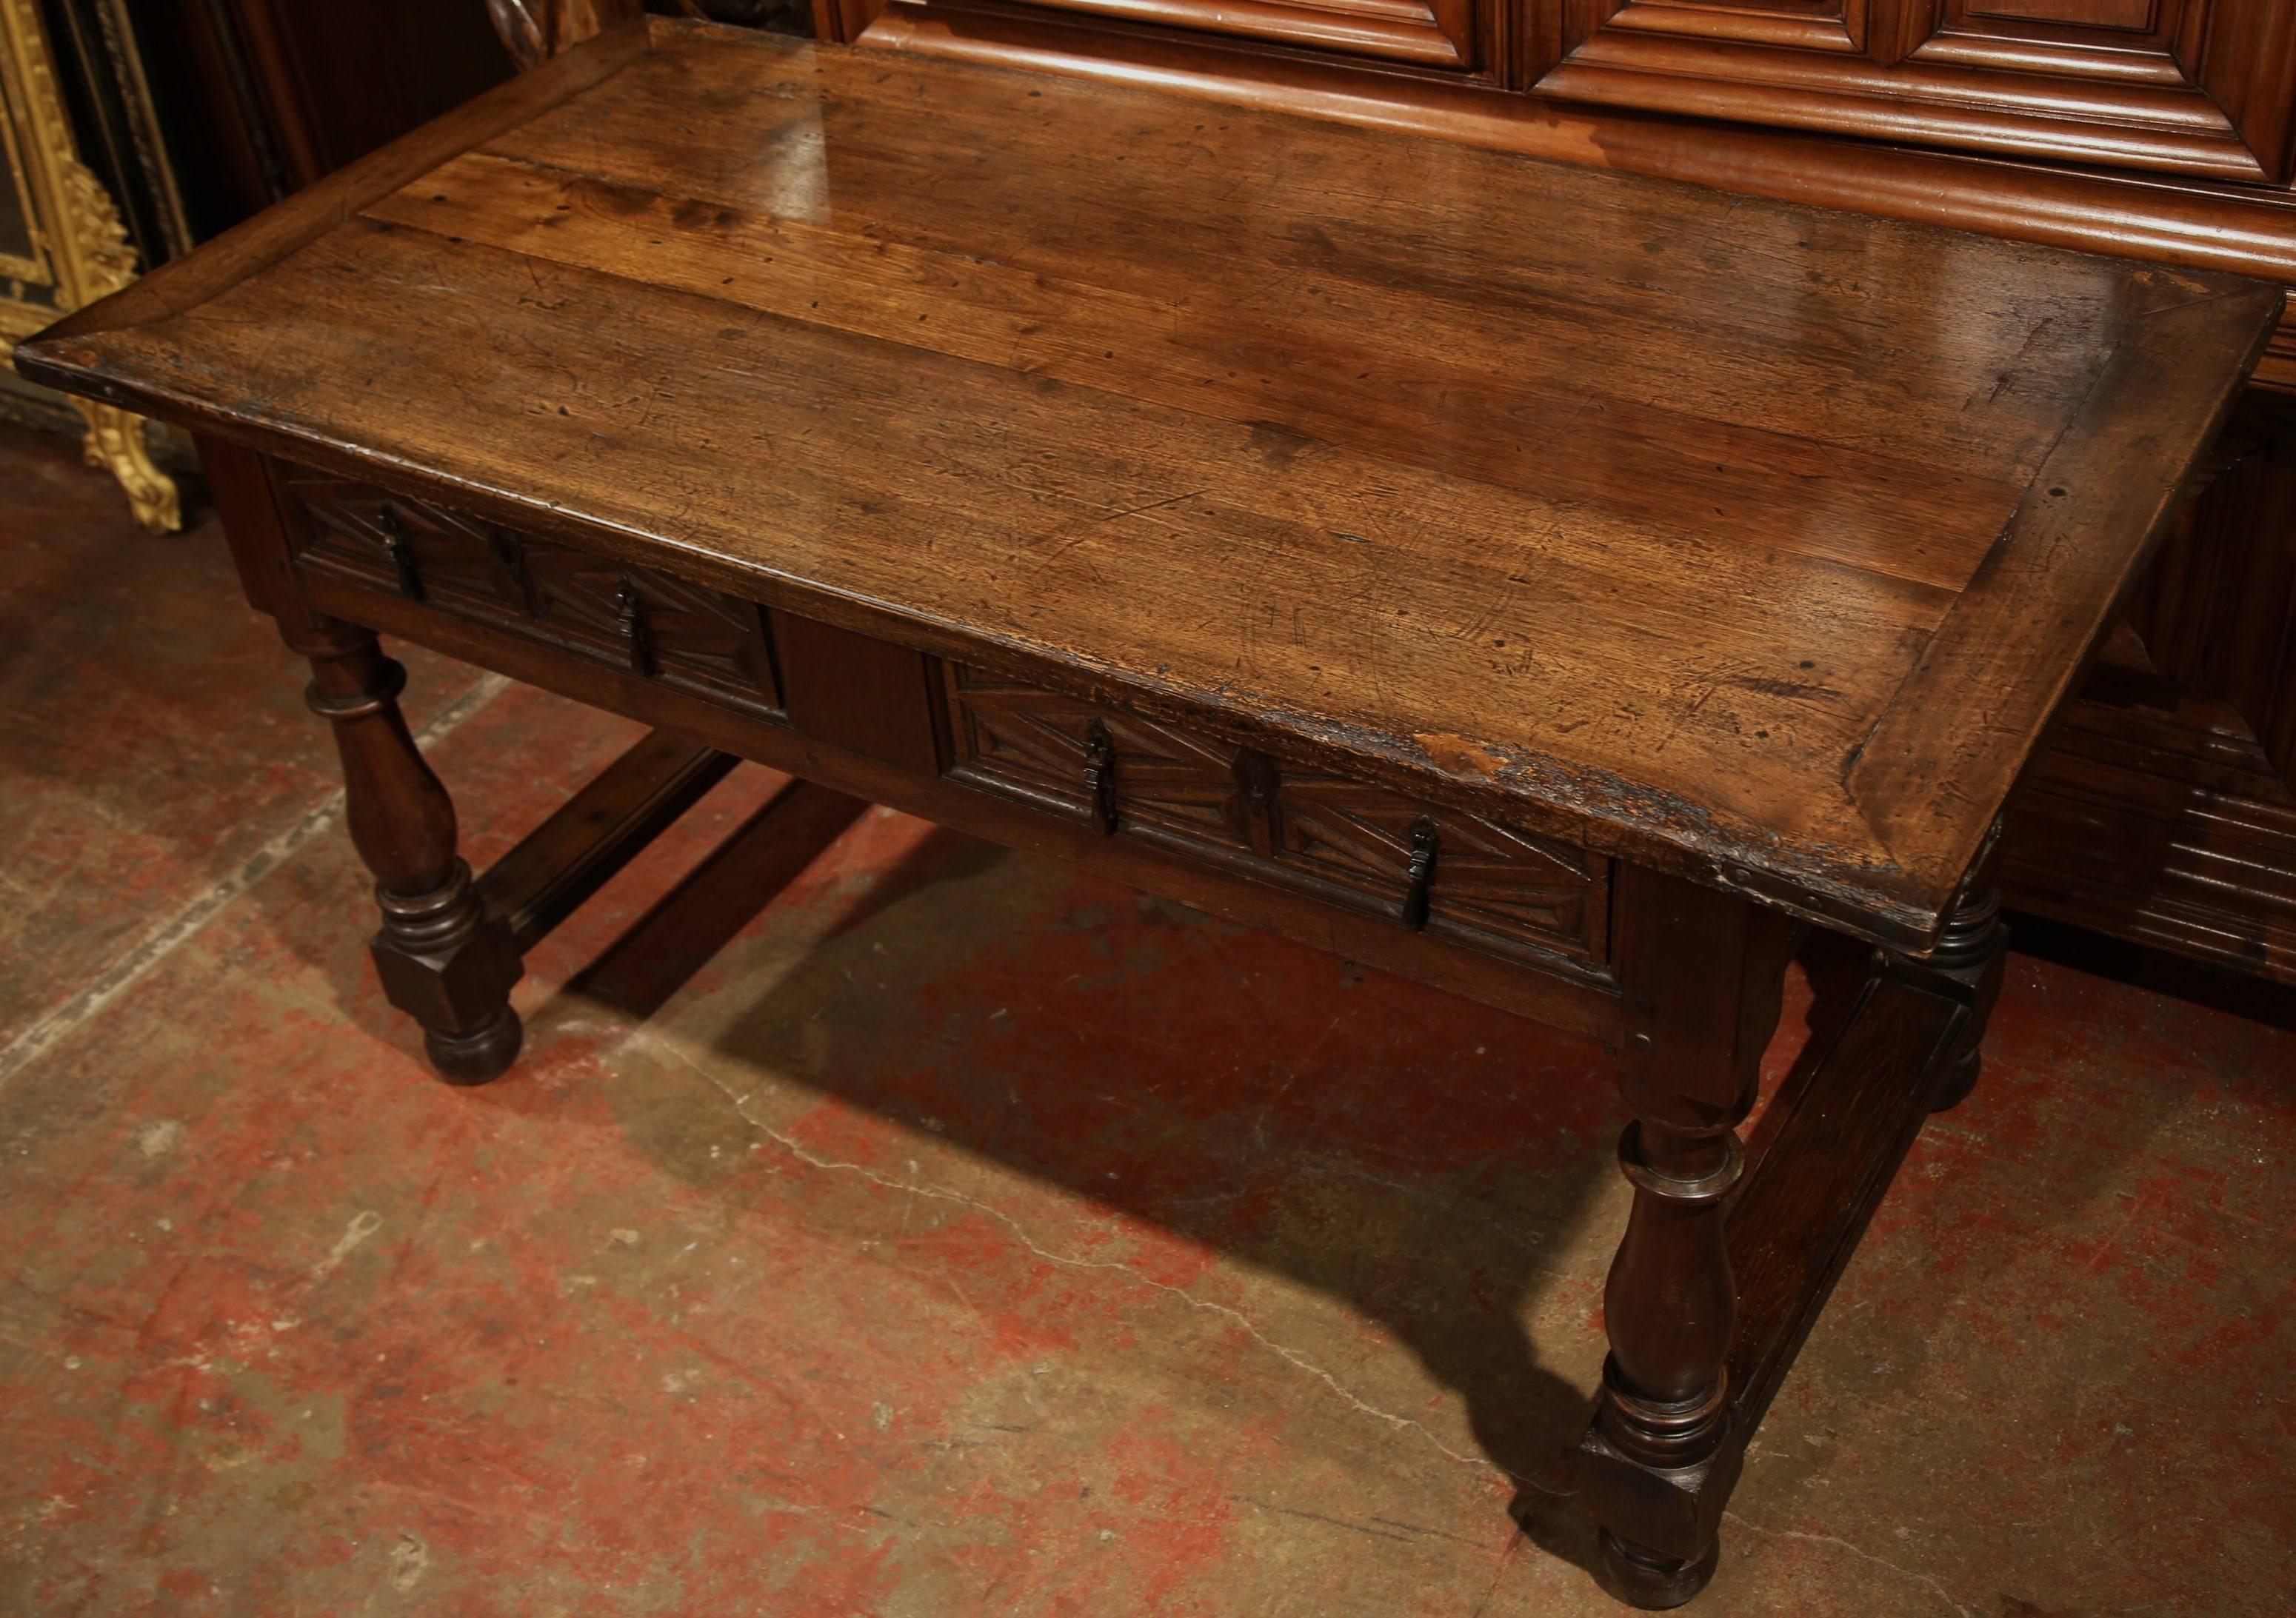 Incorporate more surface space into a long hallway or entryway with this elegant antique fruitwood console from Spain. Carved circa 1780, the table features a rectangular surface area, two drawers and turned legs joined by a bottom stretcher. The